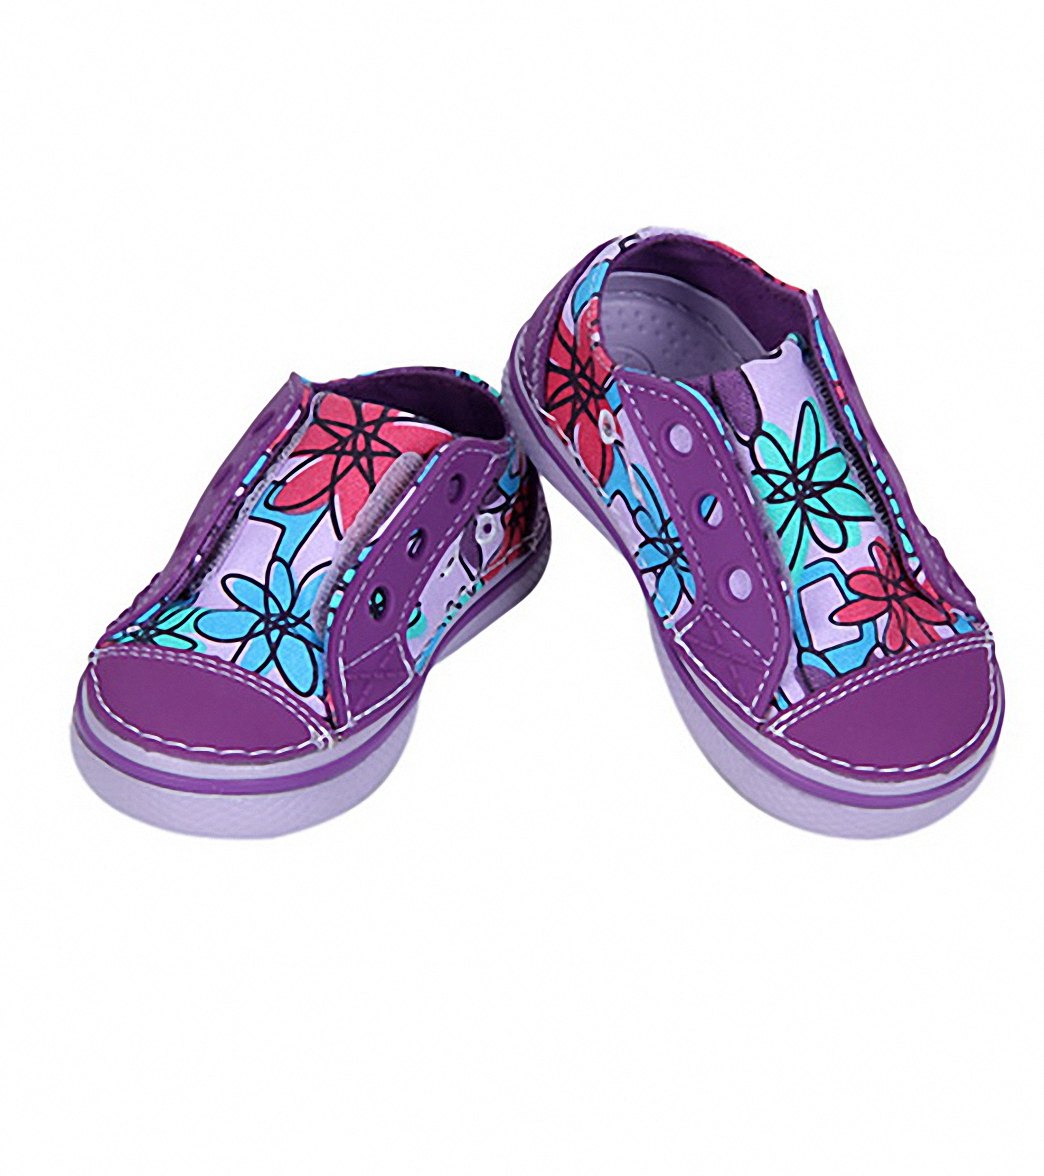  Crocs  Girls  Hover Easy On Sneaker at SwimOutlet com